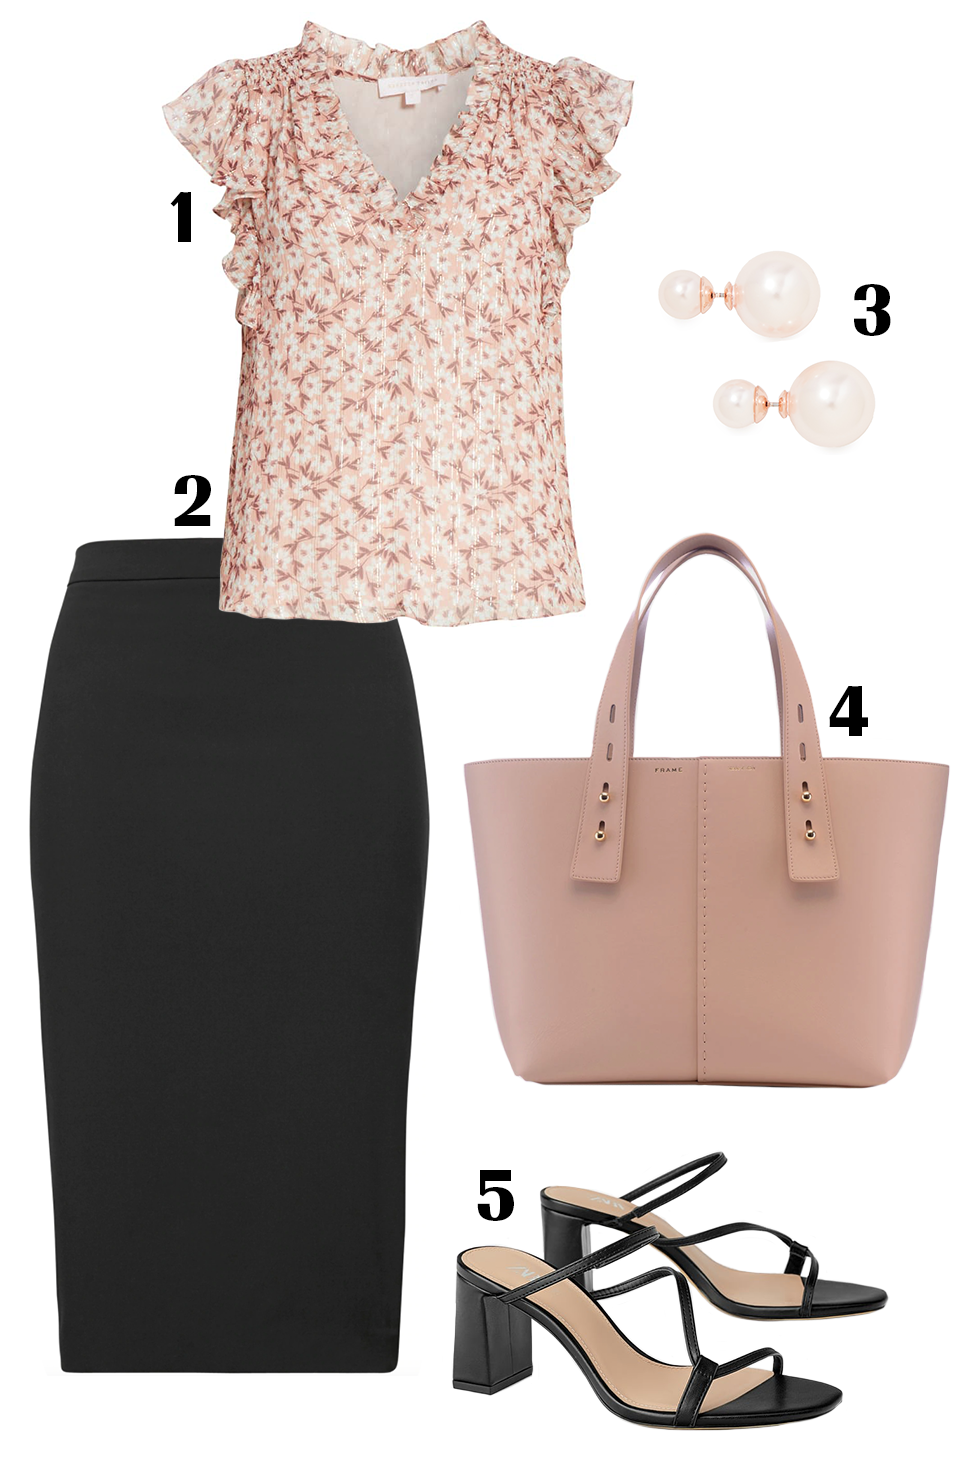 black pencil skirt work outfit